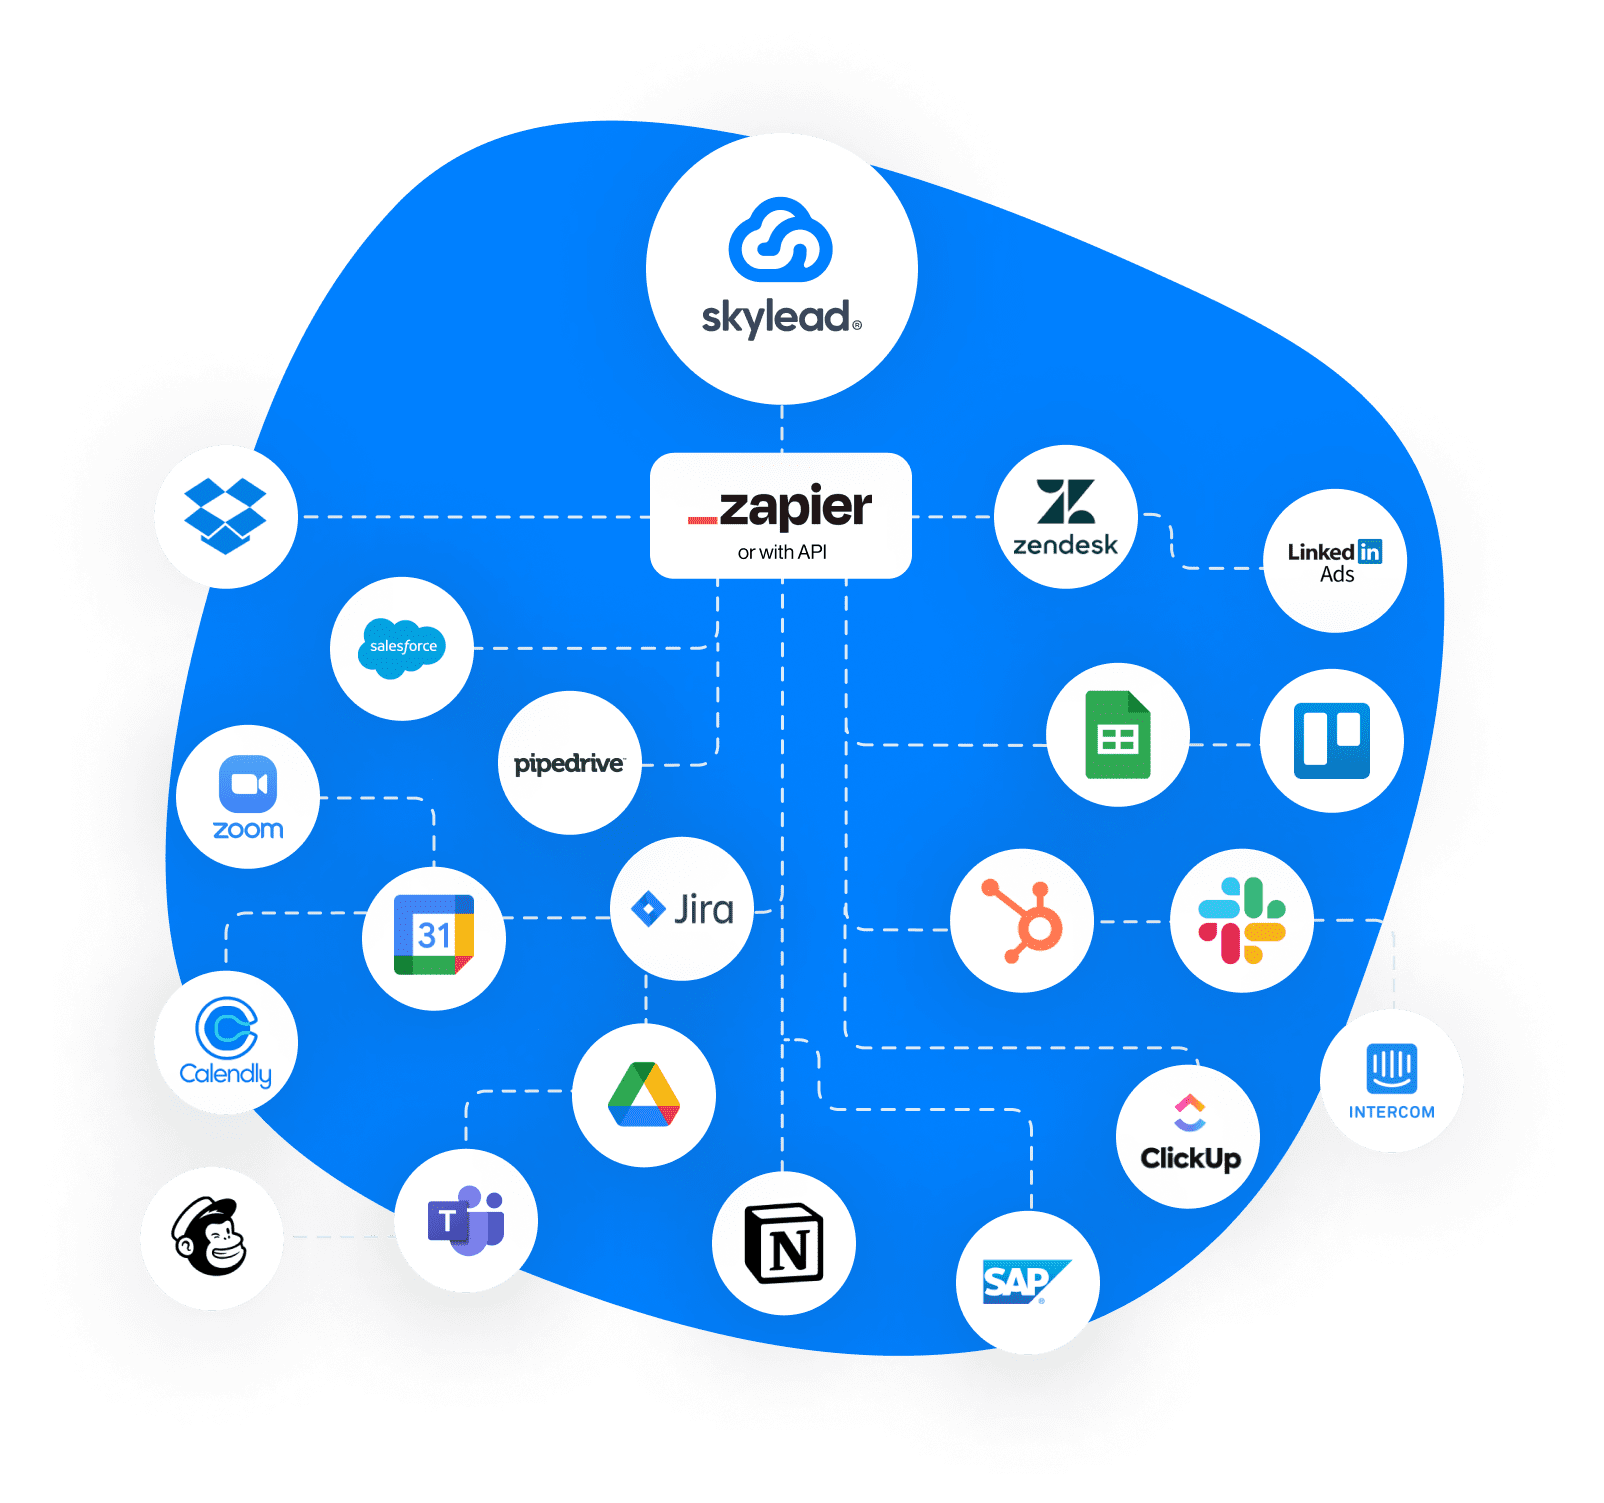 Image of Skylead's logo connected with other tools' logos simulating integration with other workflows